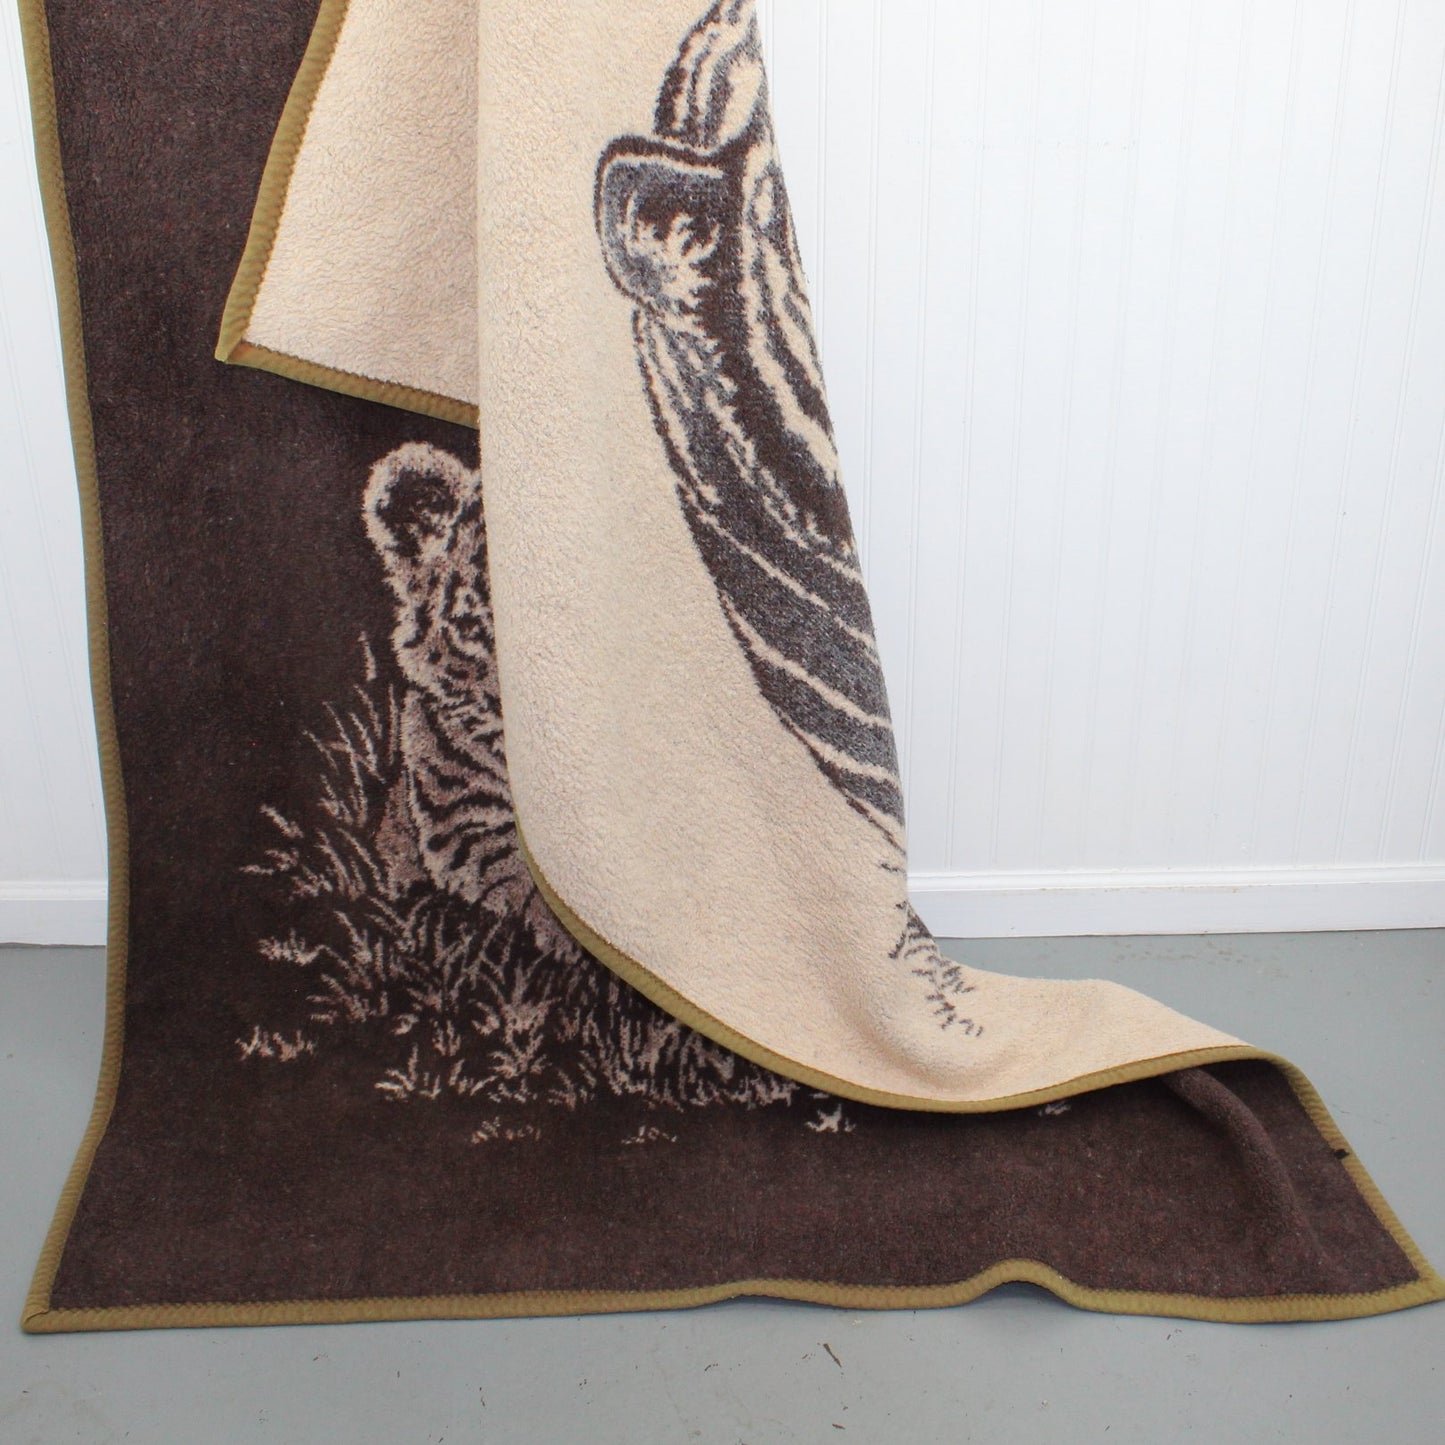 Acrylic Blanket Tiger Mother Cub Reversible Shades Brown 54" X 82" reverses to light color